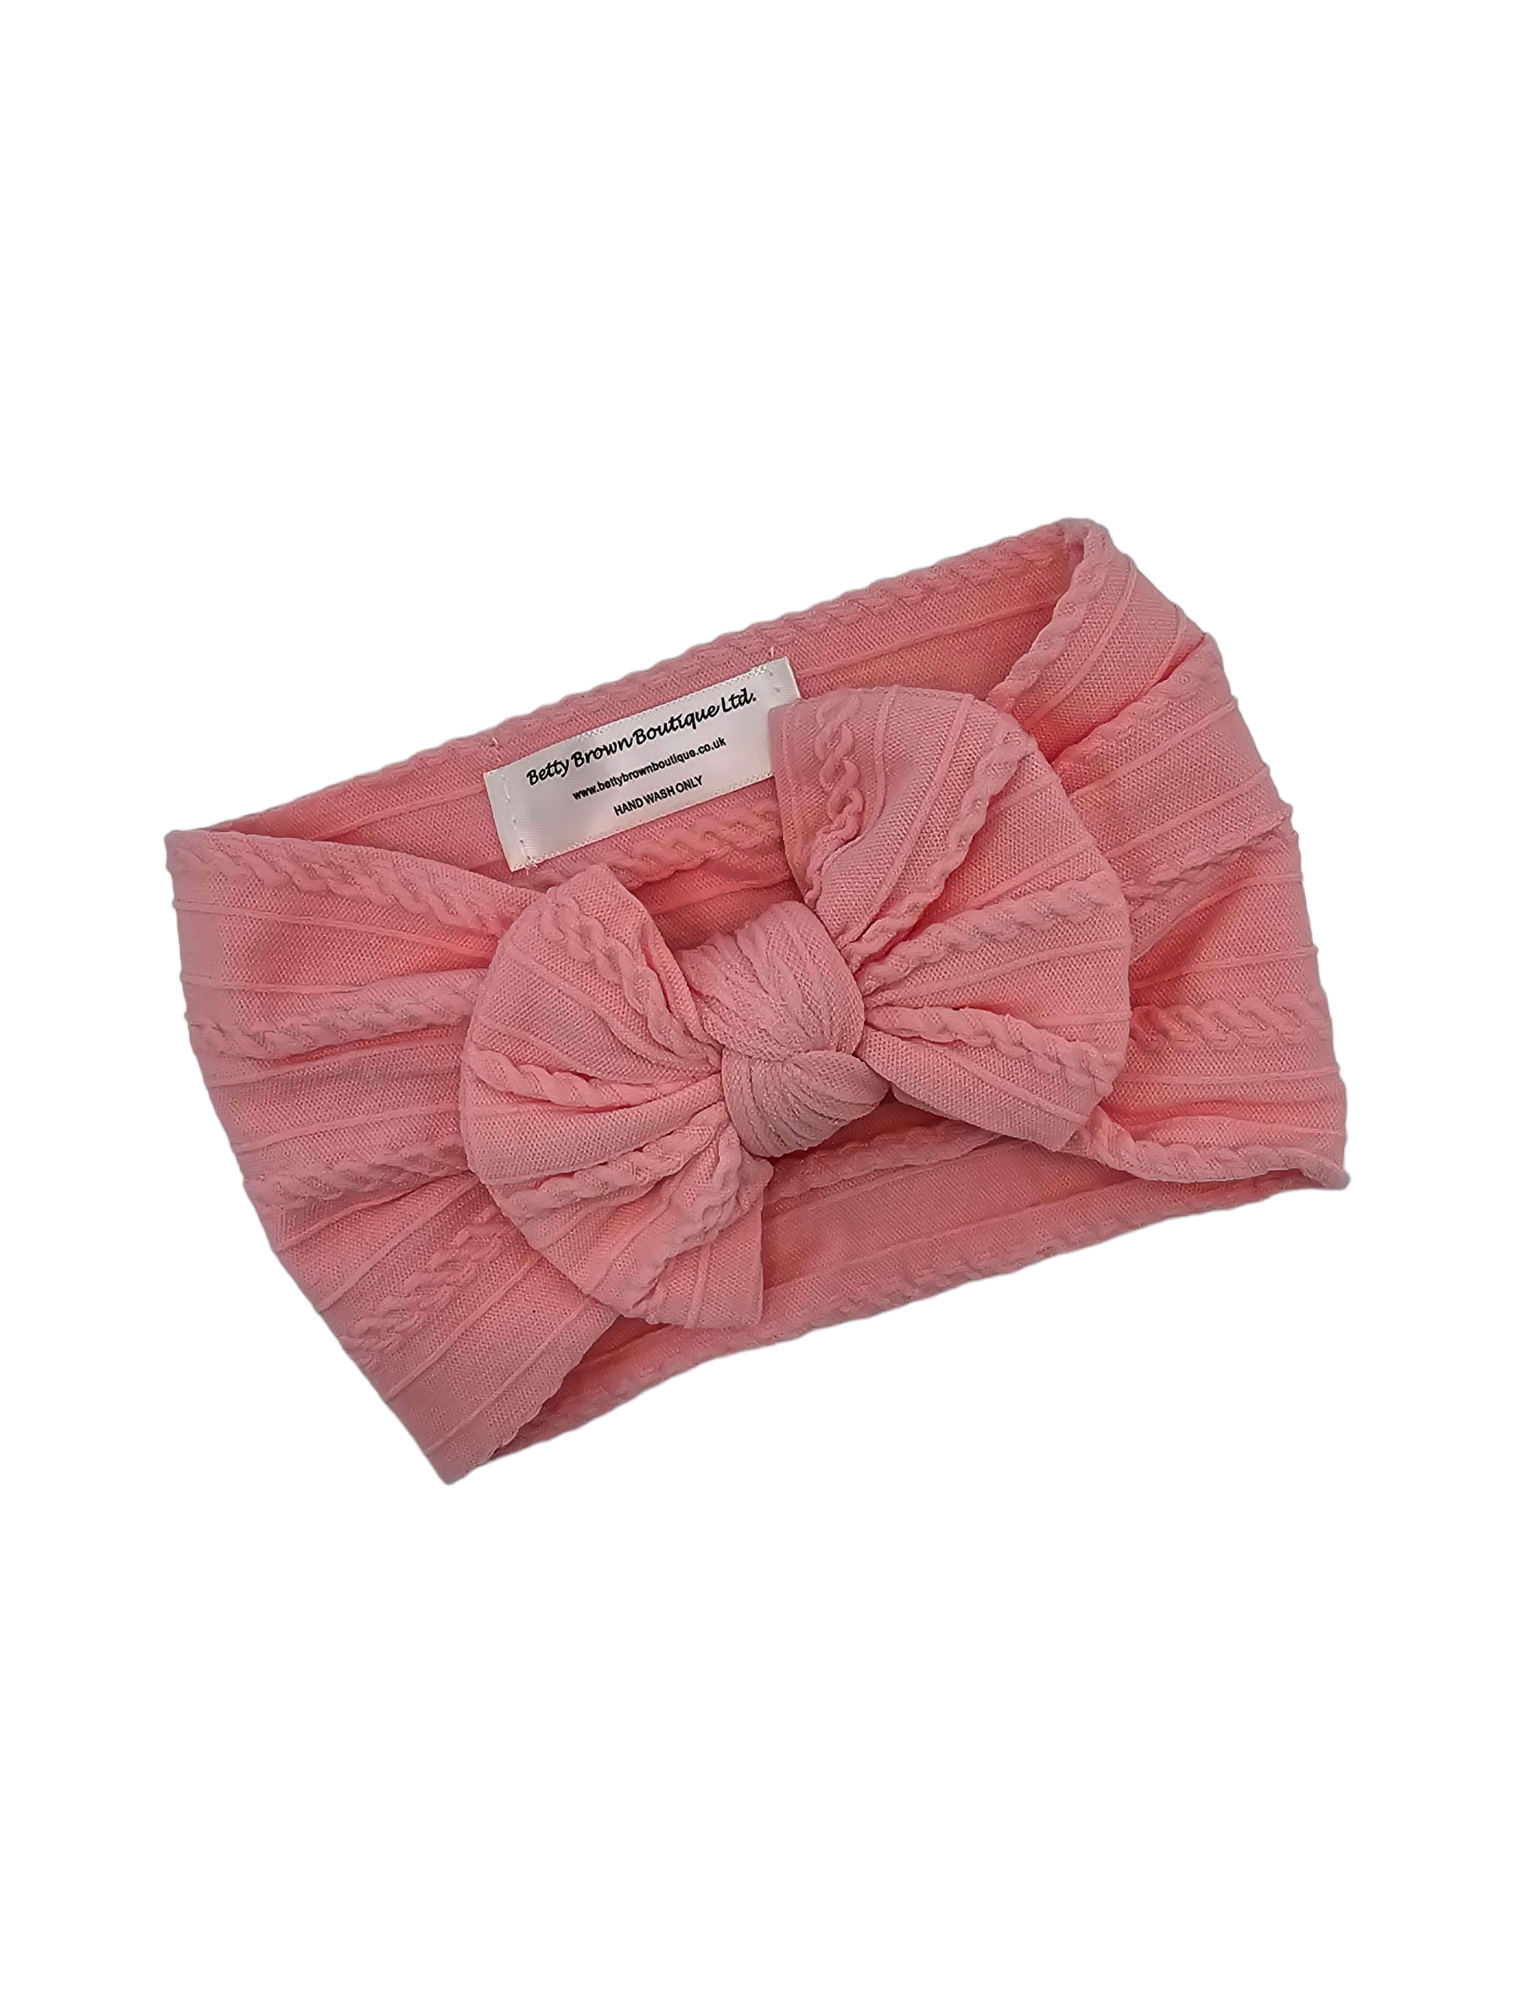 Flamingo Pink Smaller Bow Cable Knit Headwrap - Betty Brown Boutique Ltd